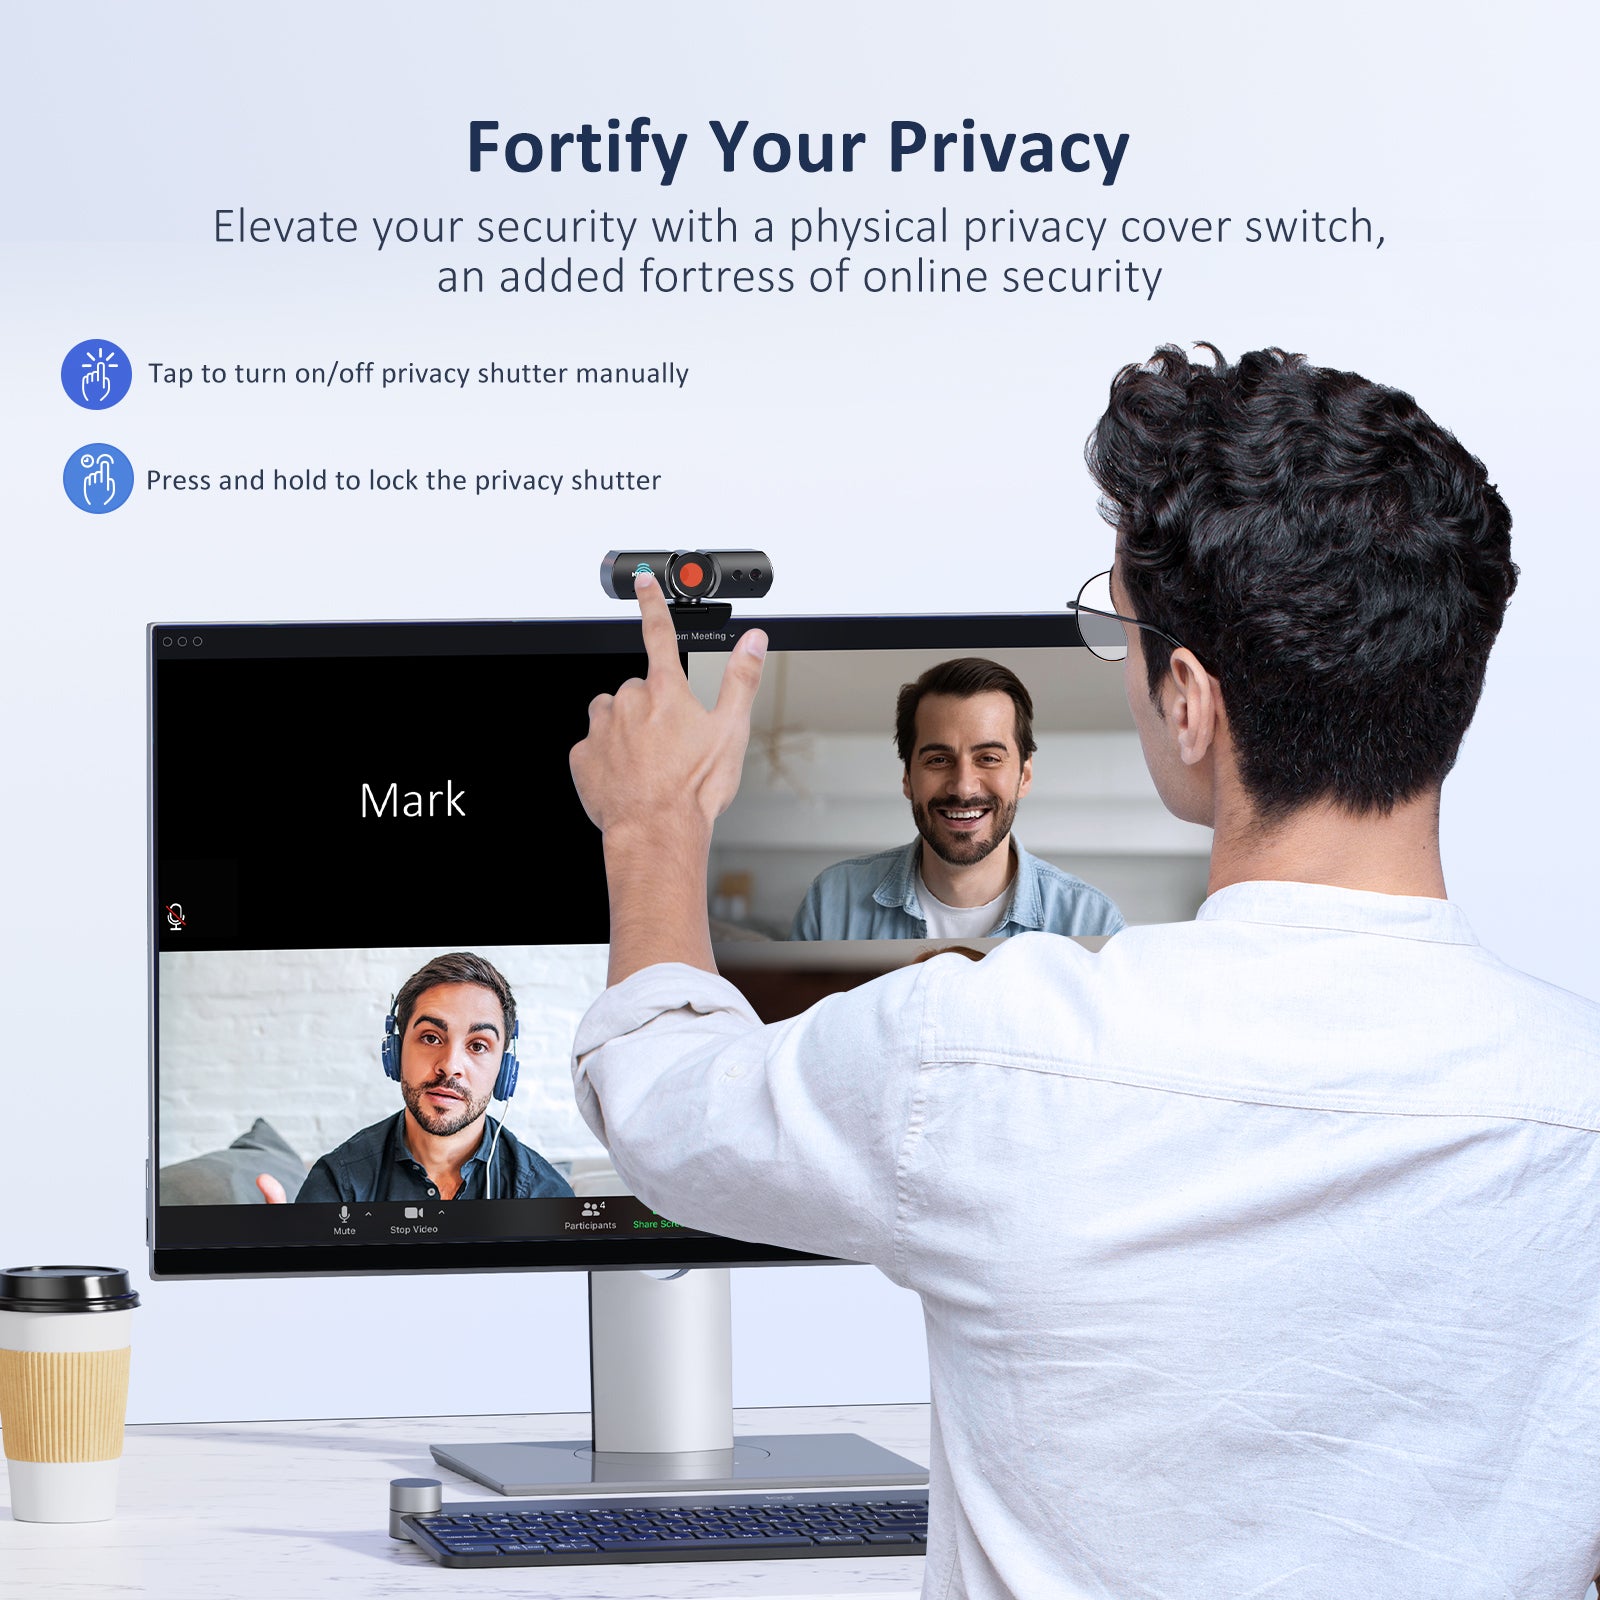 The man tap to manually activate webcam's privacy shutter.